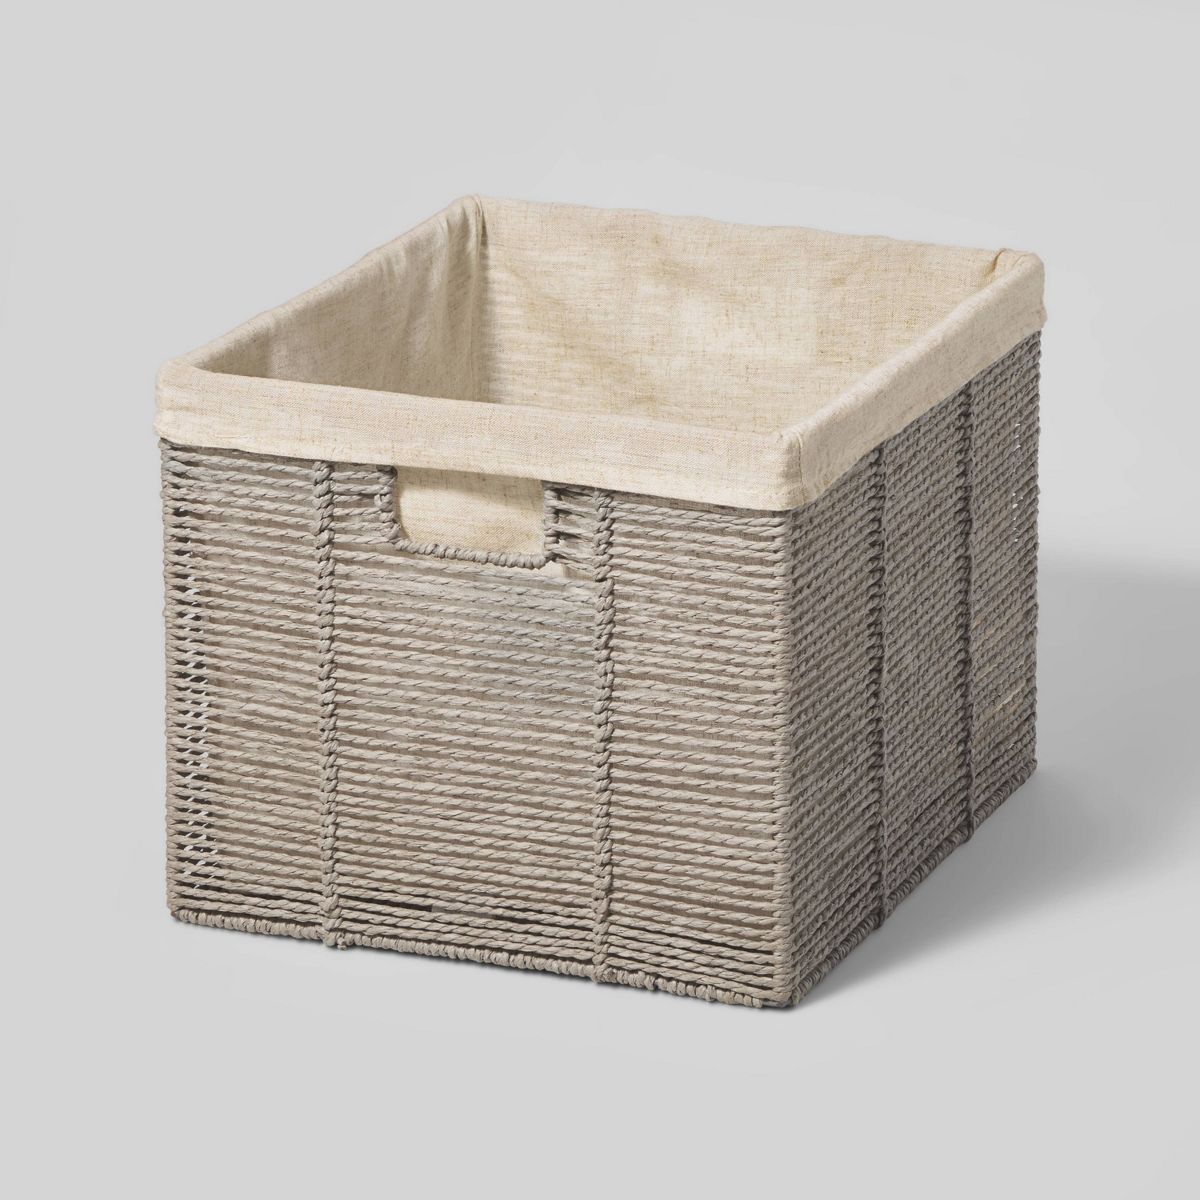 14.75" x 13" x 11" Large Lined Woven Milk Crate Gray - Brightroom™ | Target